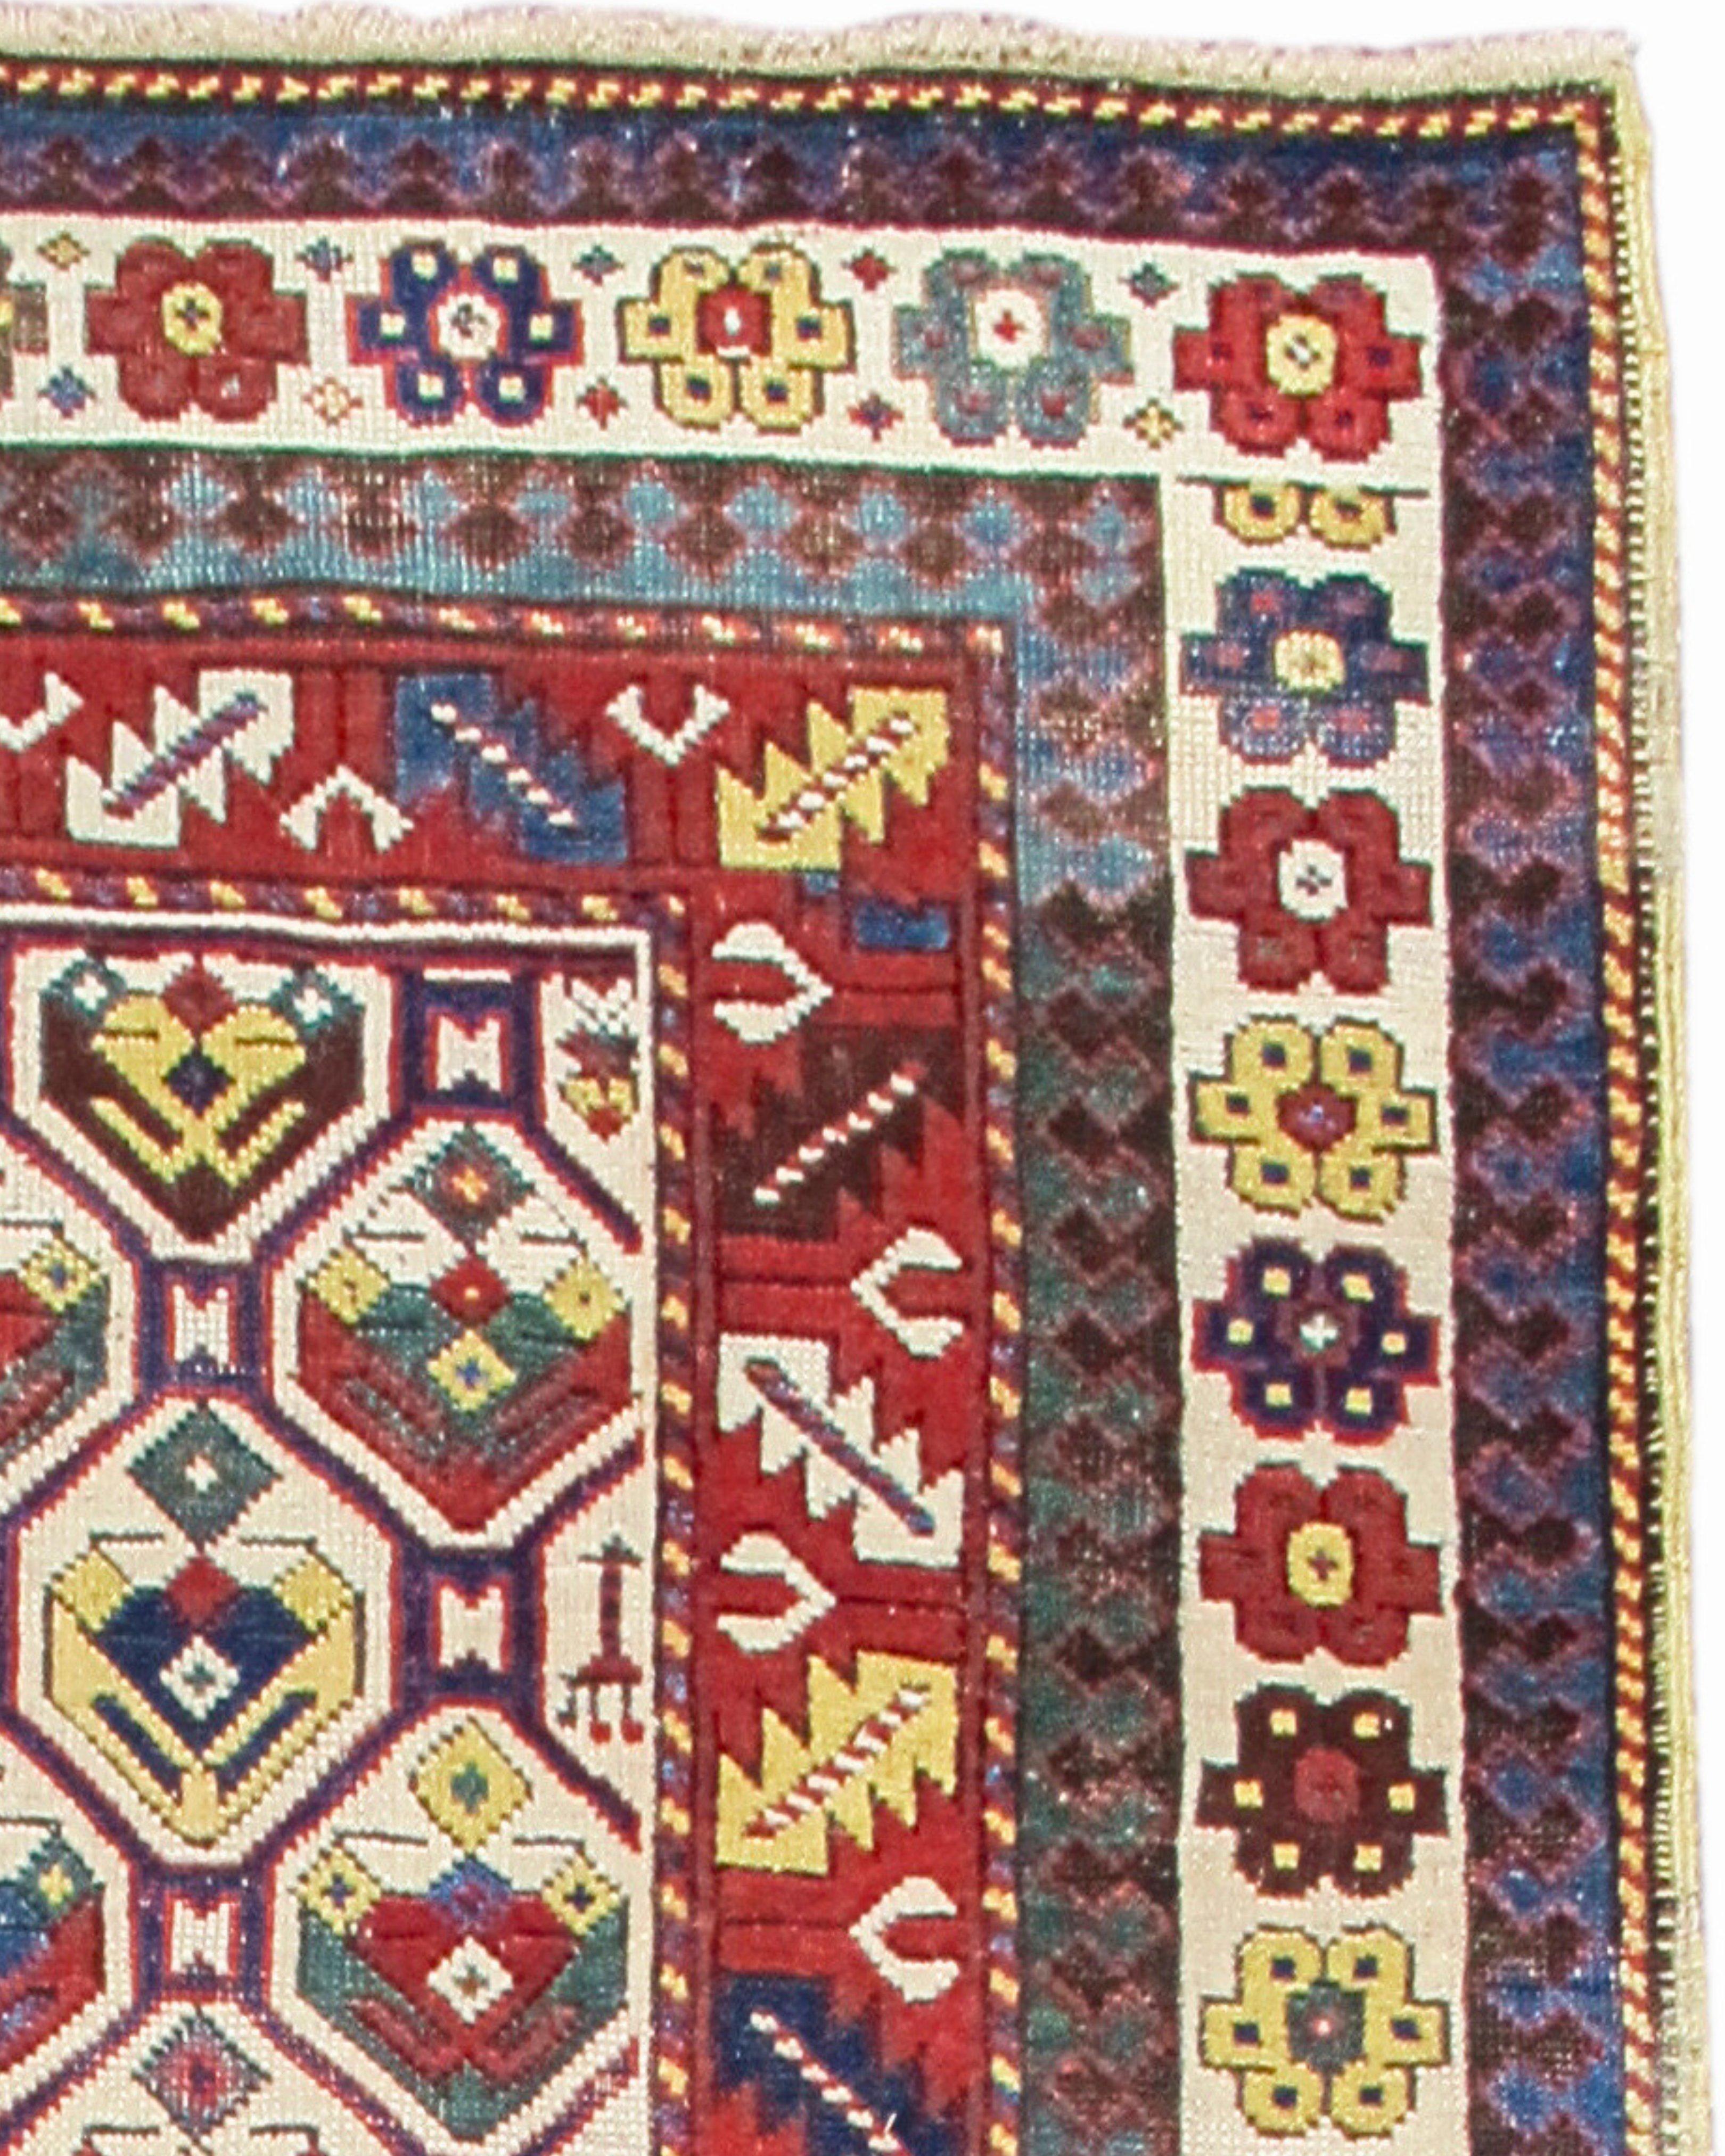 Antique Karabagh Caucasian Rug, Late 19th Century

Areas of restoration throughout.

Additional Information:
Dimensions: 6'6